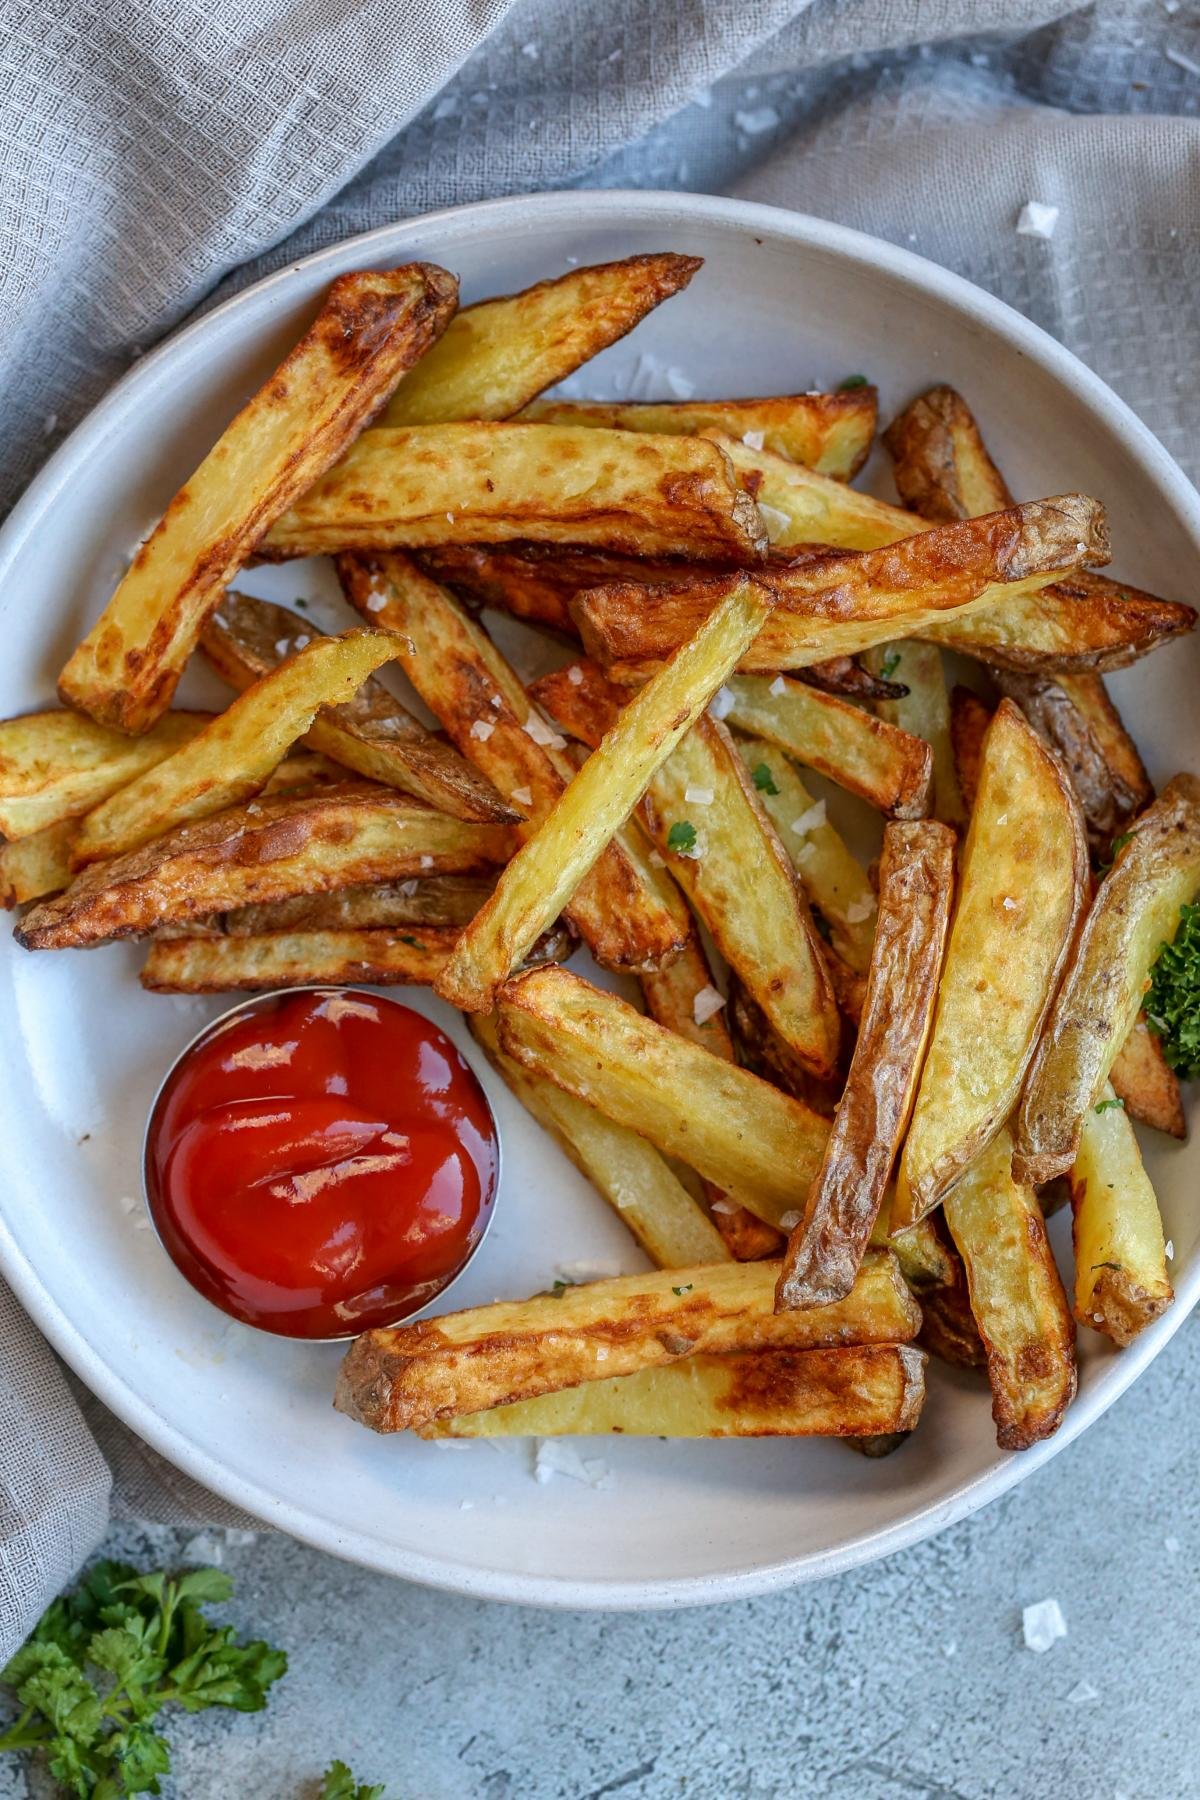 15-Minute Air Fryer French Fries (So Easy!) - Momsdish